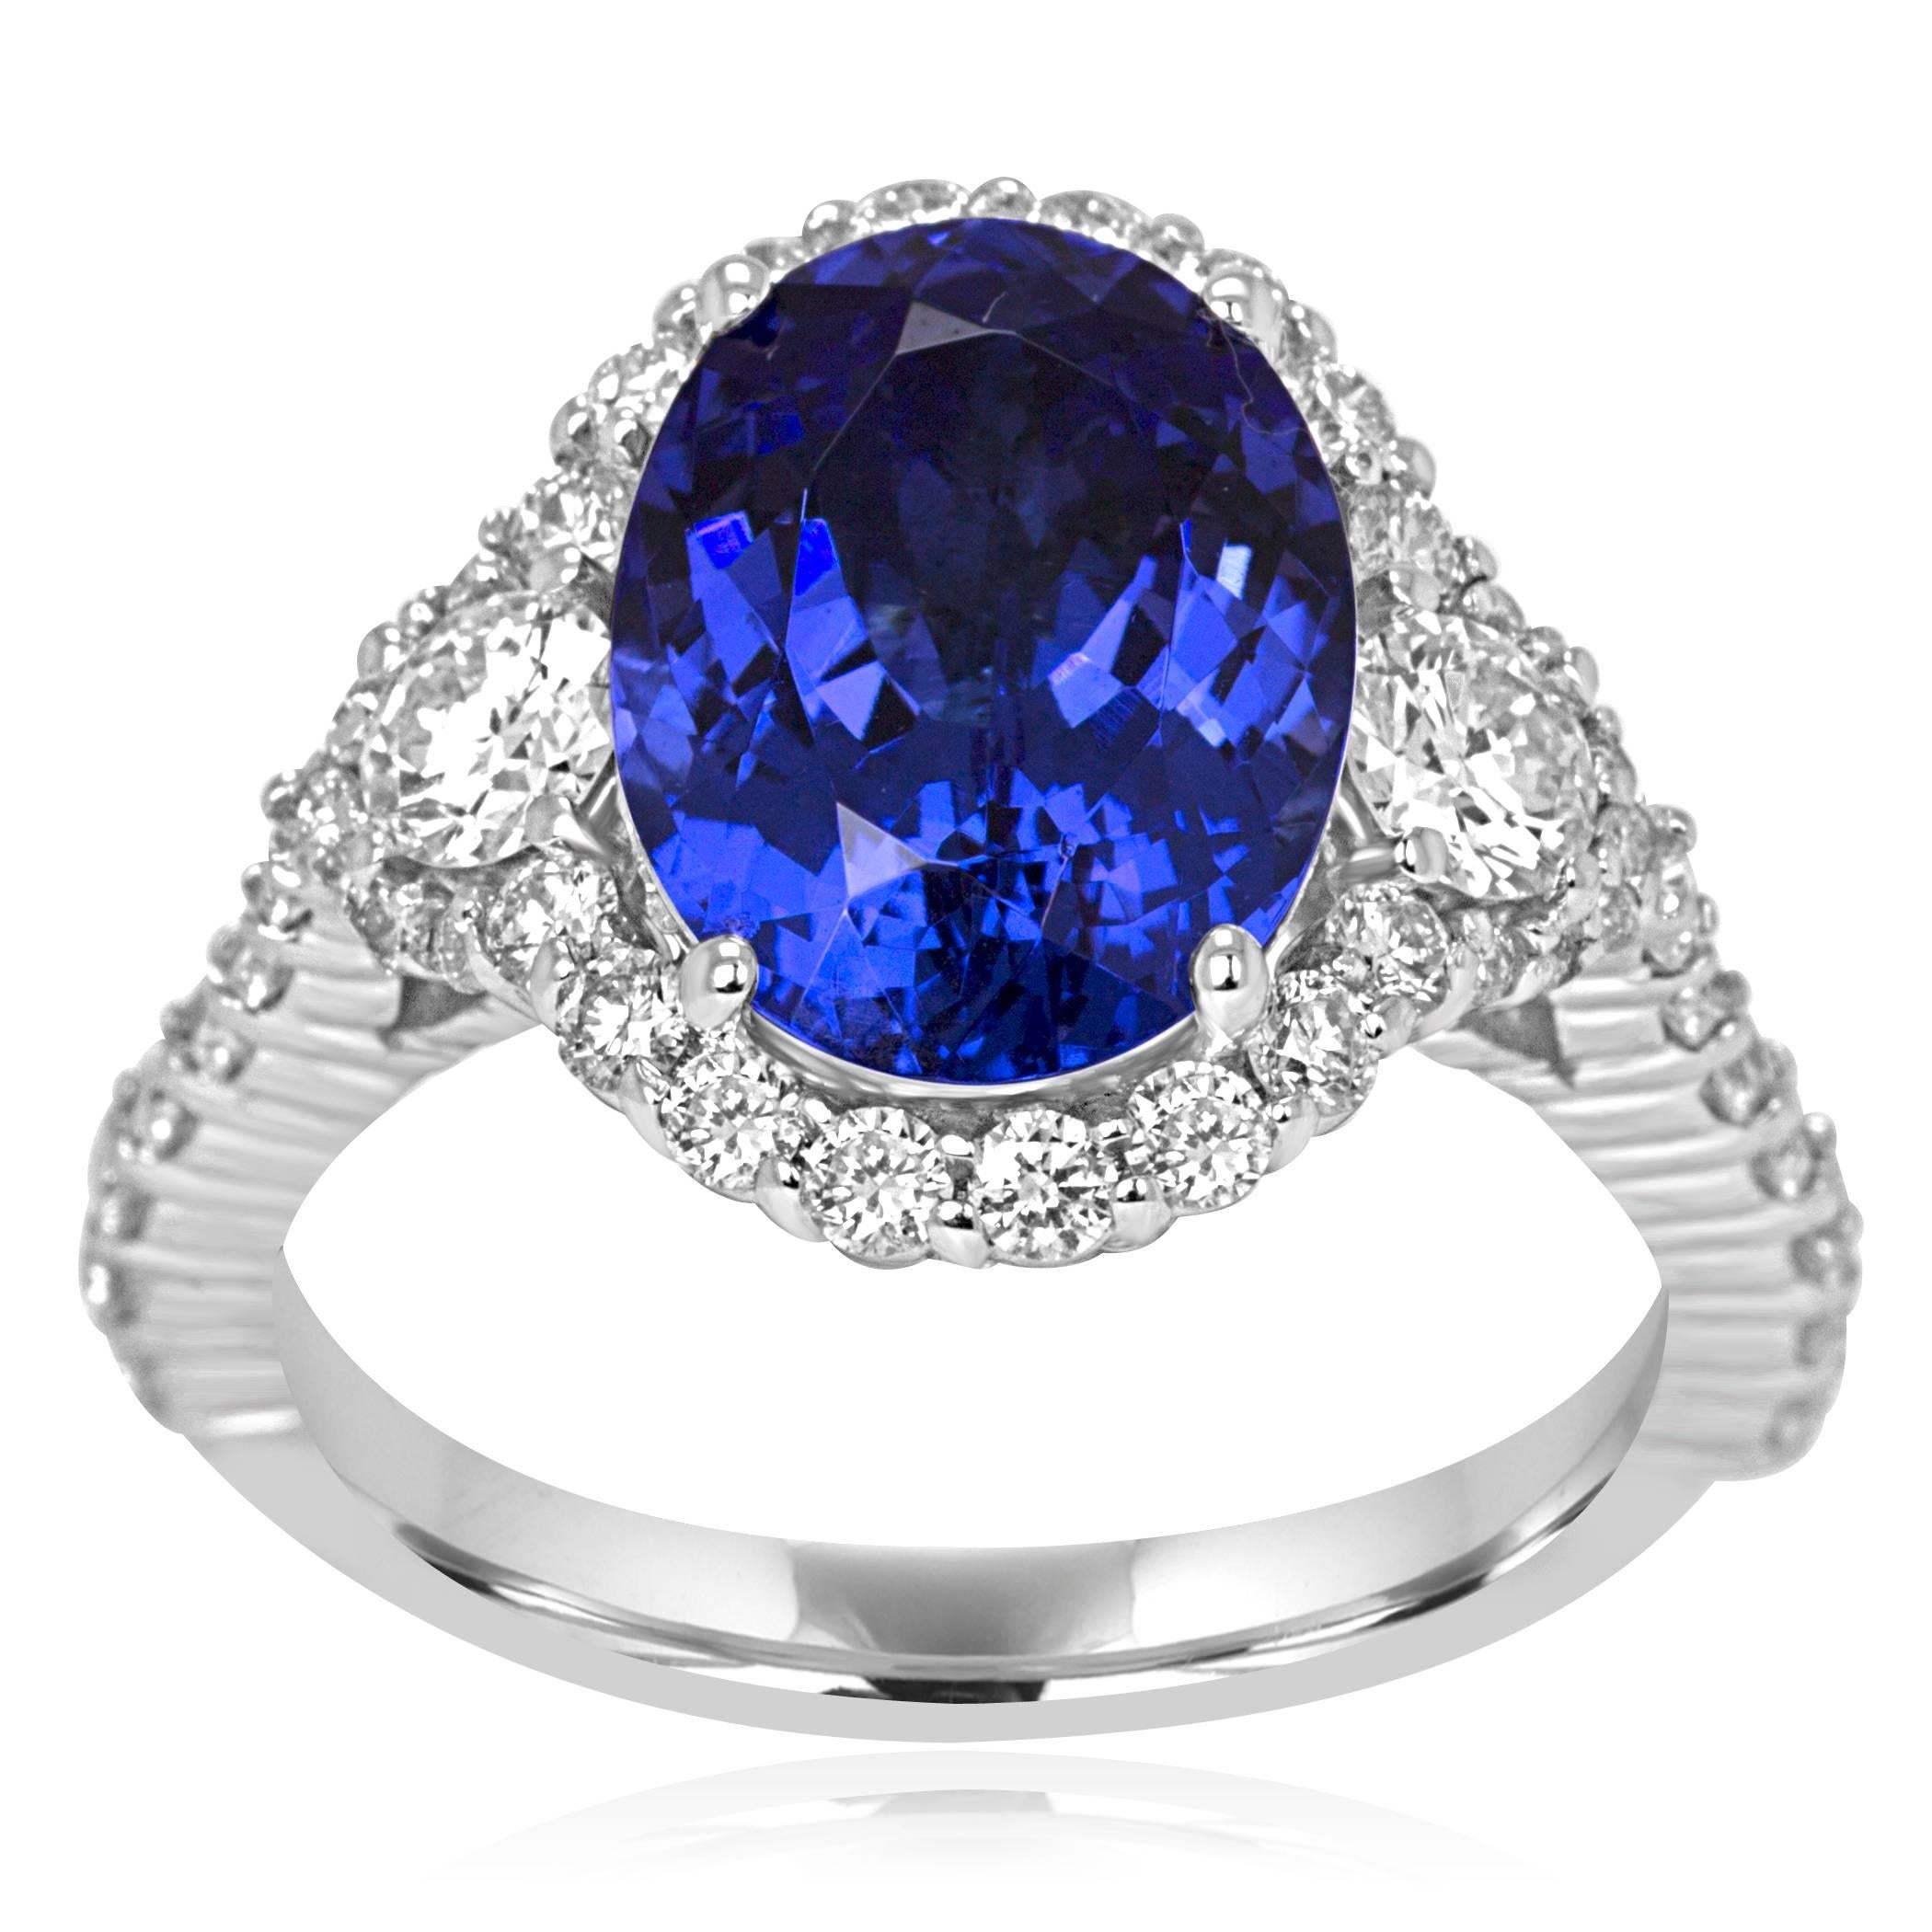 Tanzanite Oval 3.93 Carat Flanked by 2 White Diamond Rounds 0.34 Carat encircled in a single Halo of White Round Diamonds 0.79 Carat in a stunning Handmade 14K White Gold Ring.

Style available in different price ranges. Prices are based on your